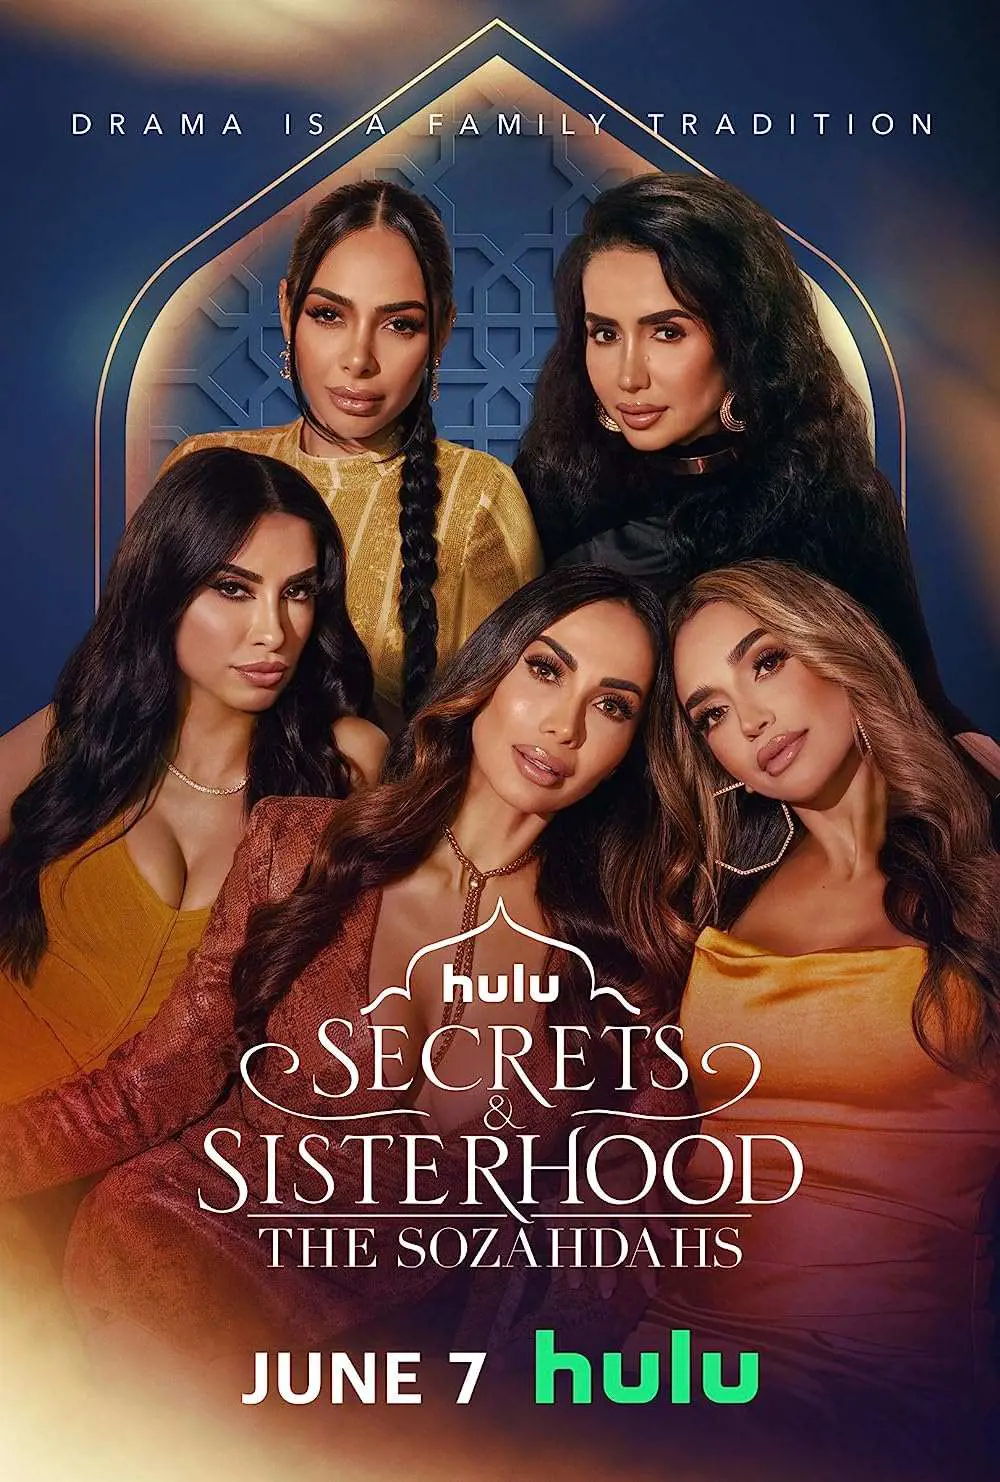 Hulu's Secrets & Sisterhood: The Sozahdahs debuted on June 7; the show features 10 sisters of Afghani origin who proudly identify as American Muslims